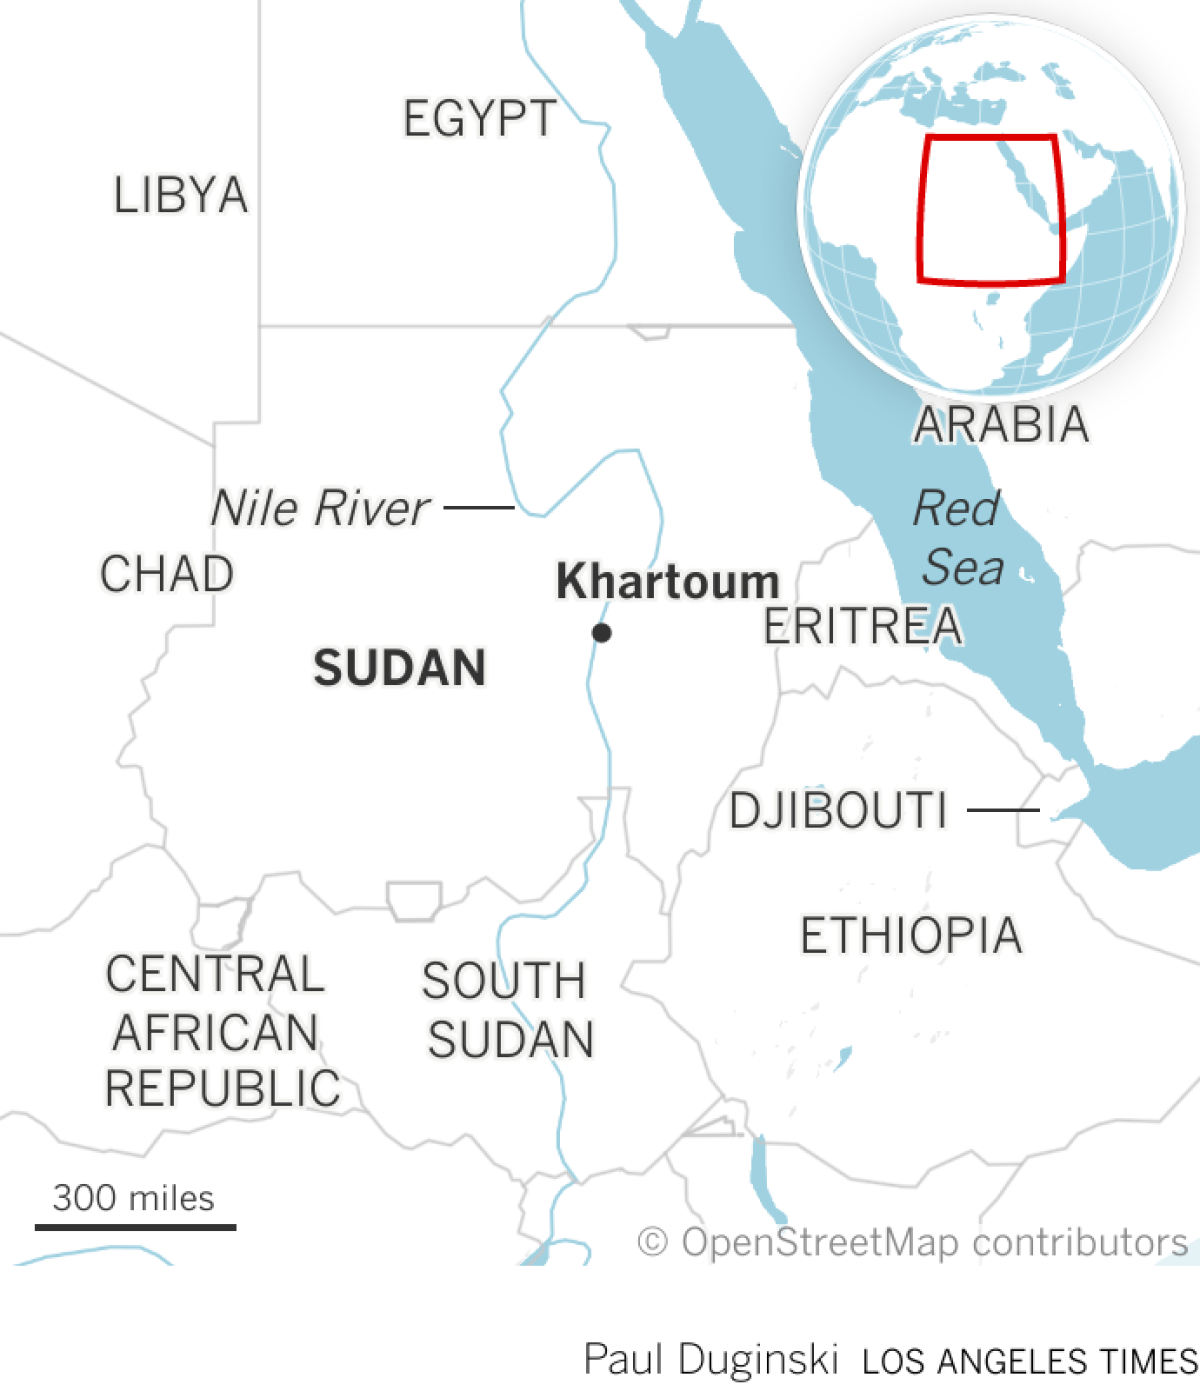 Locator map of Sudan and its capital city of Khartoum in relation to surrounding countries.